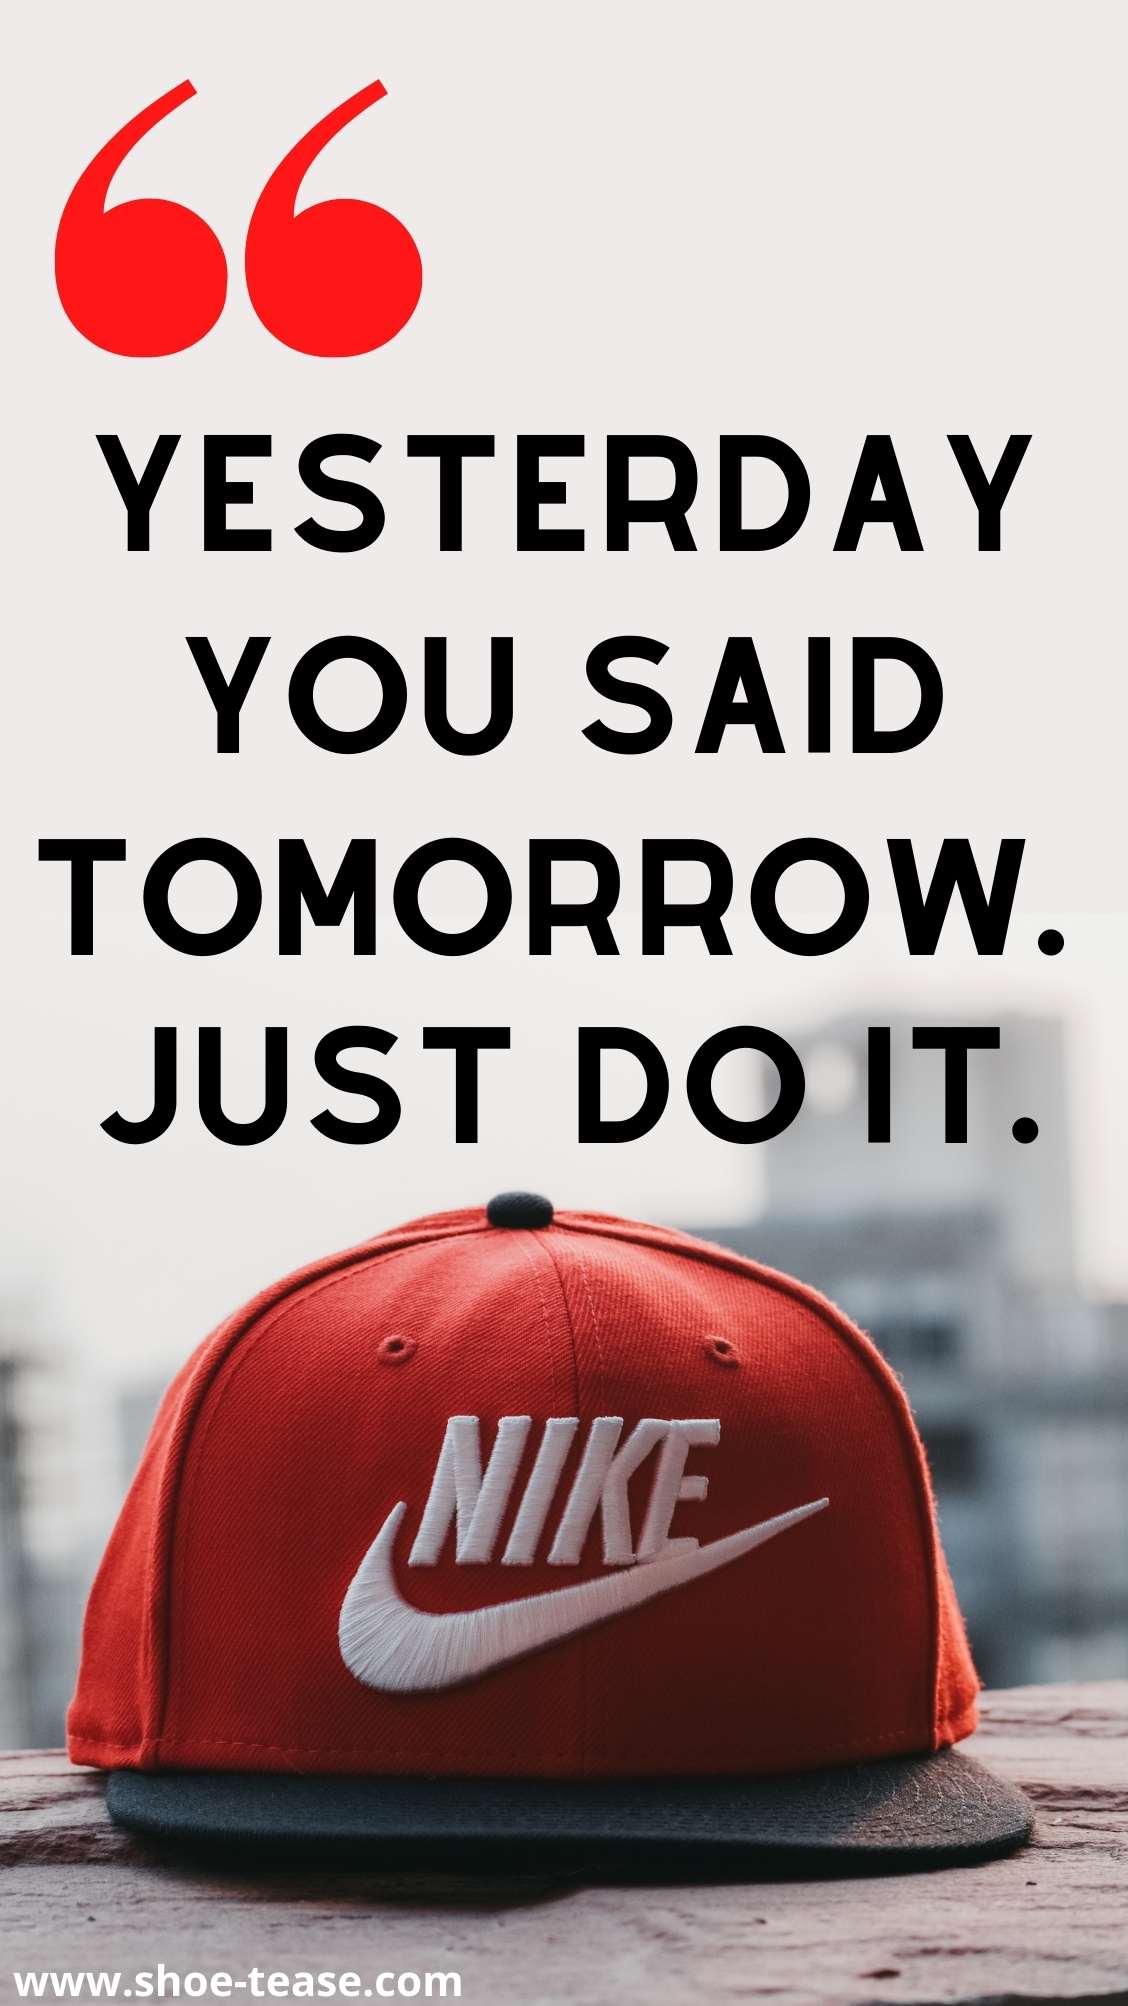 Over 100 Nike Quotes, Motivational Slogans and Sayings about Nike